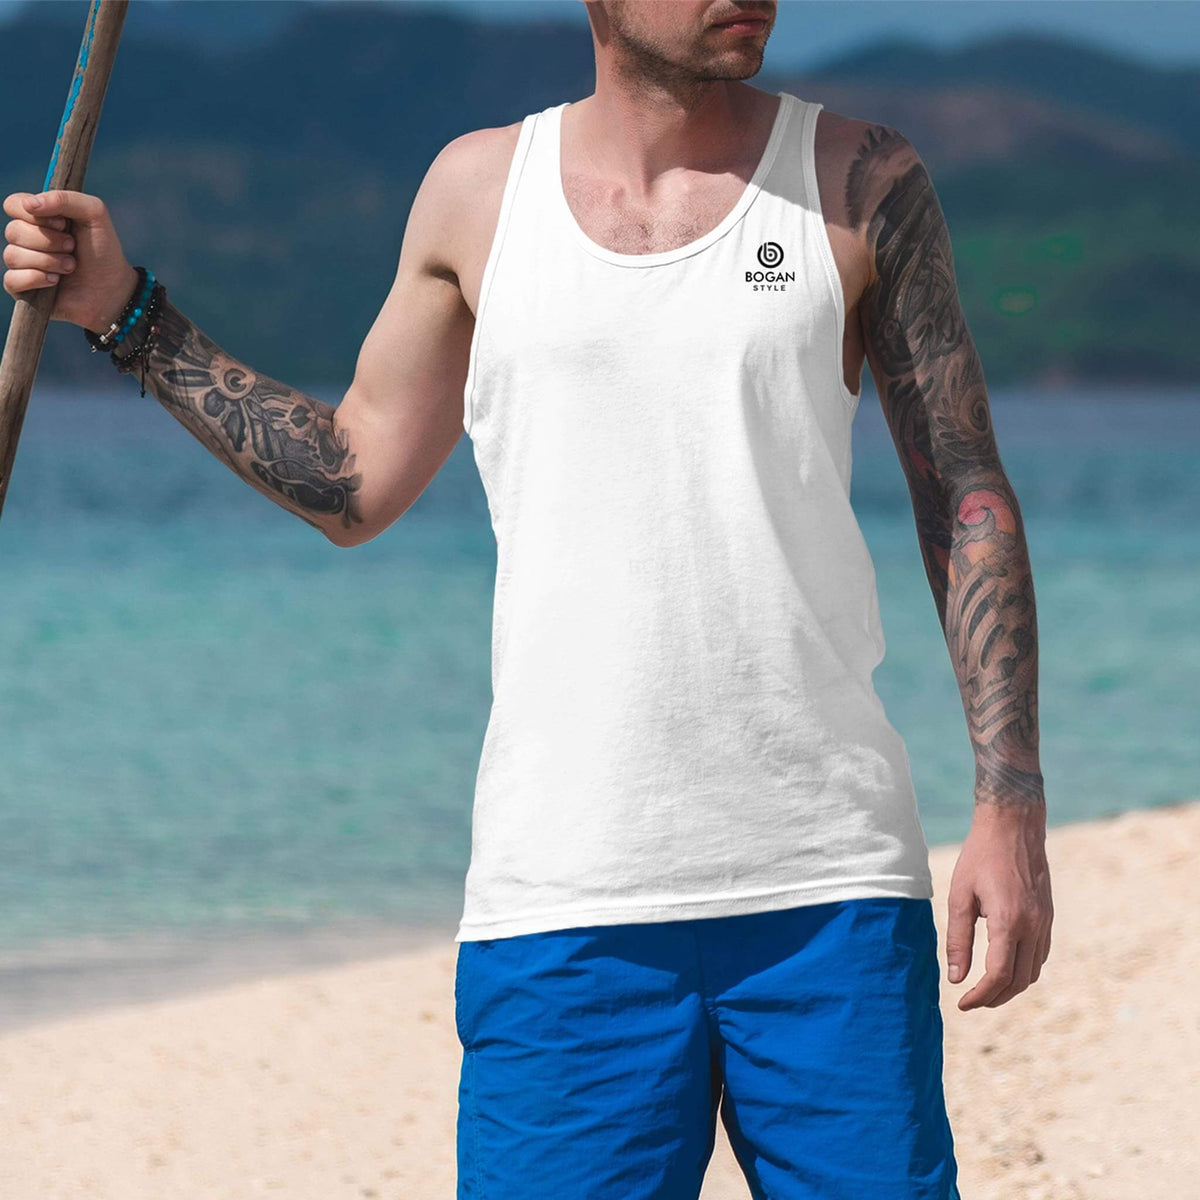 man-on-beach-wears-white-tank-top-with-small-bogan-style-logo